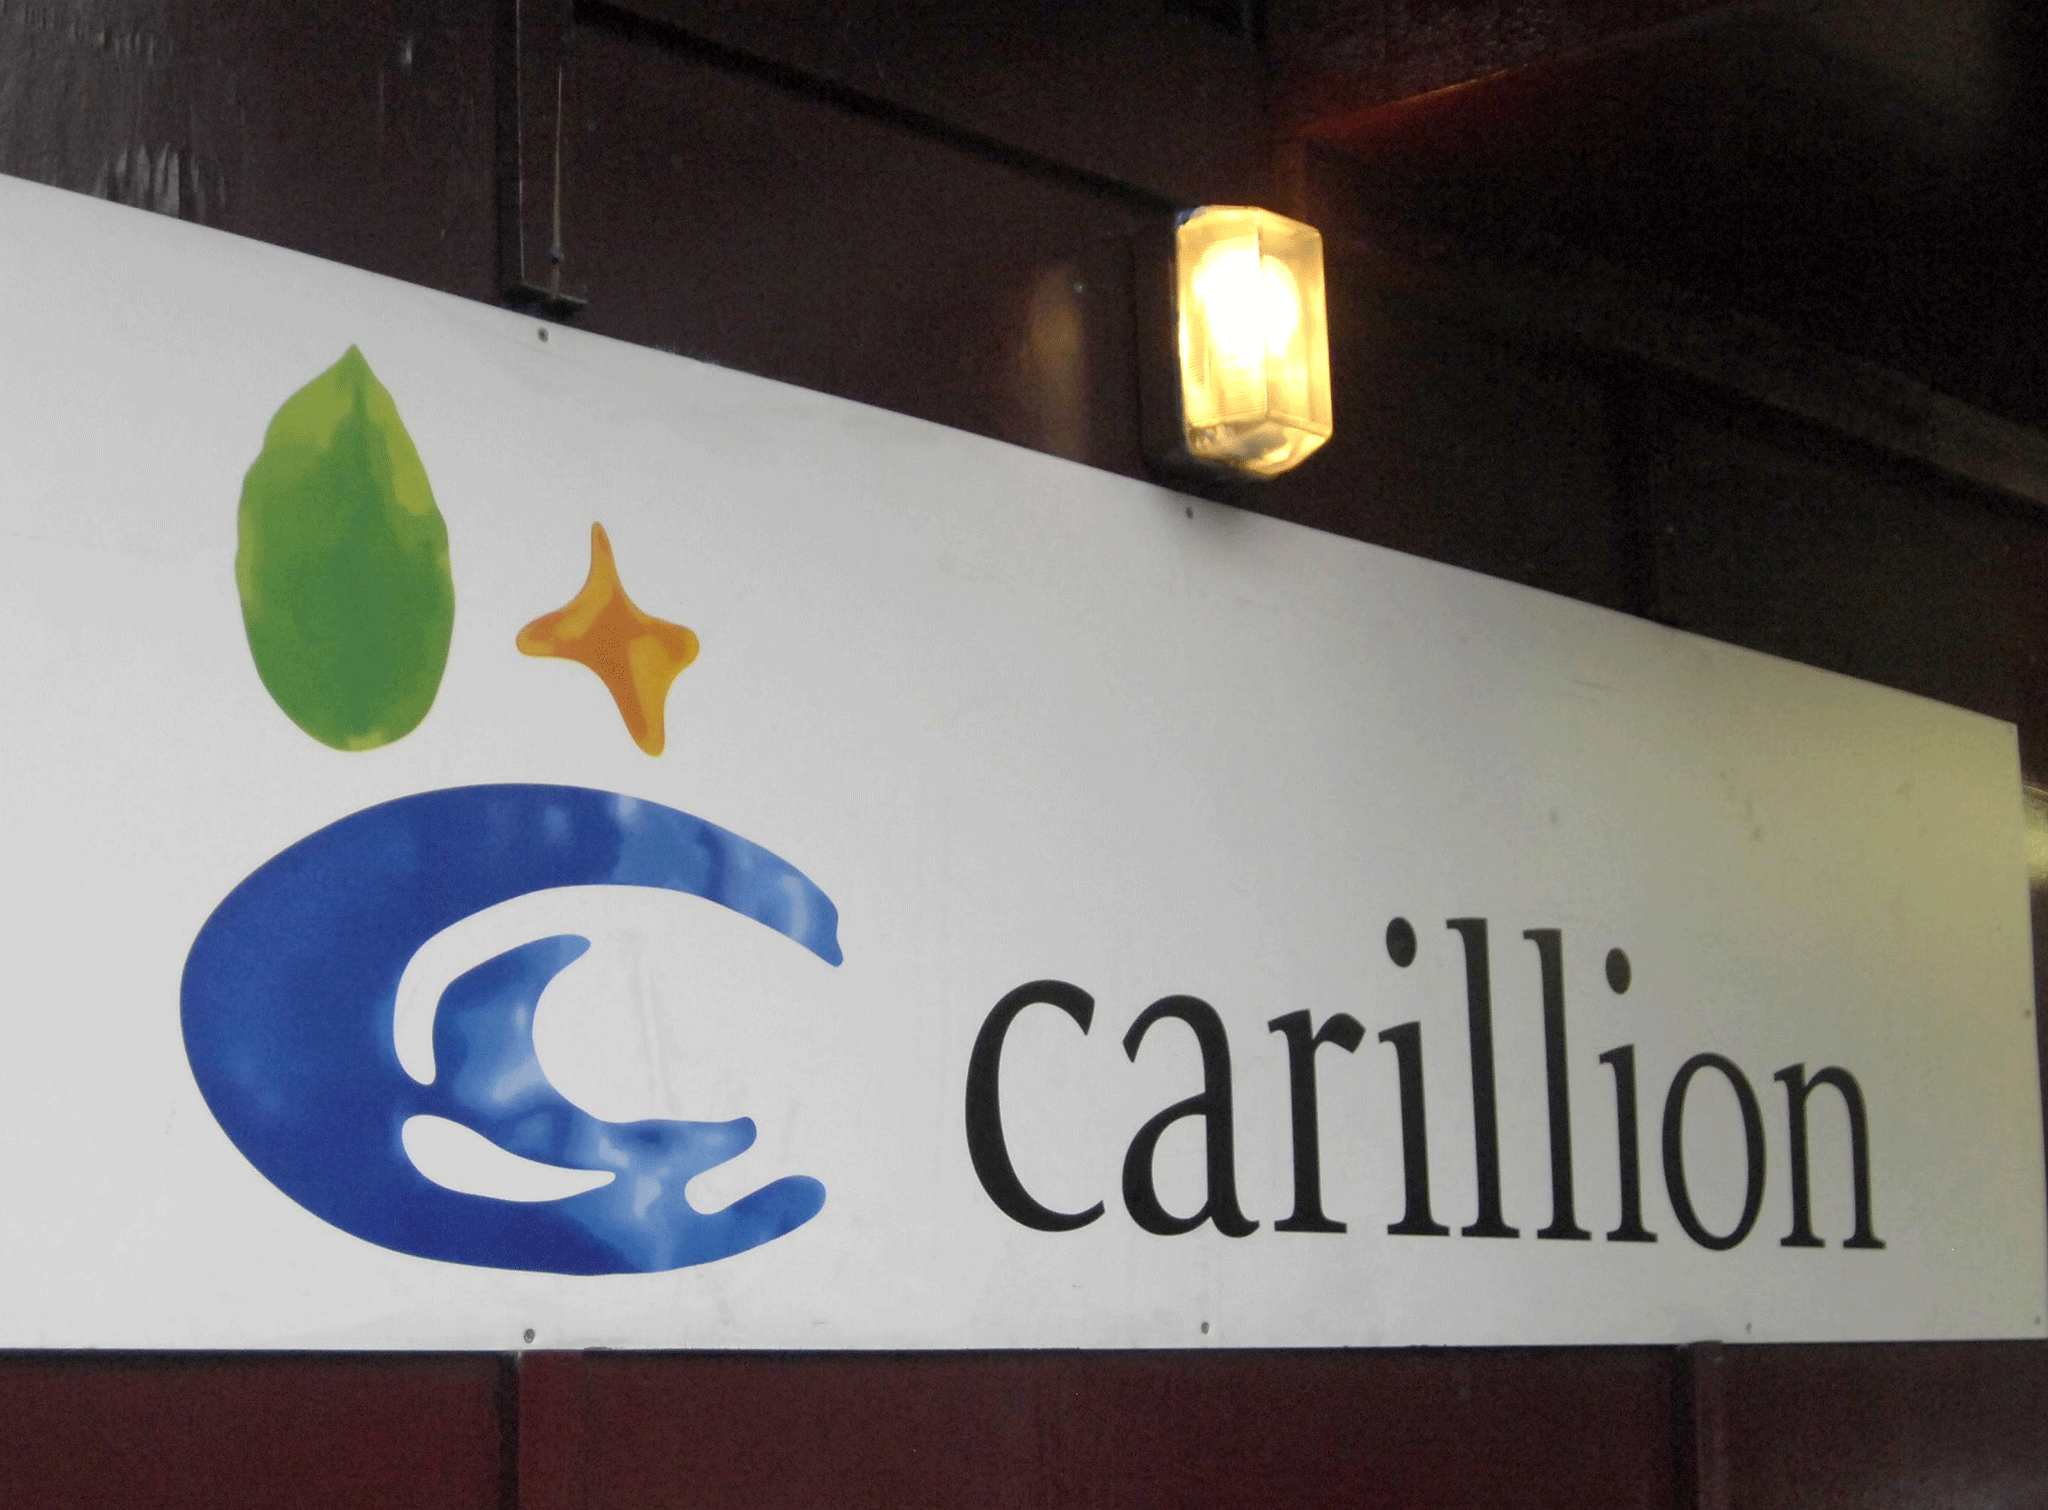 Crisis-hit Carillion awarded £158m MoD contracts